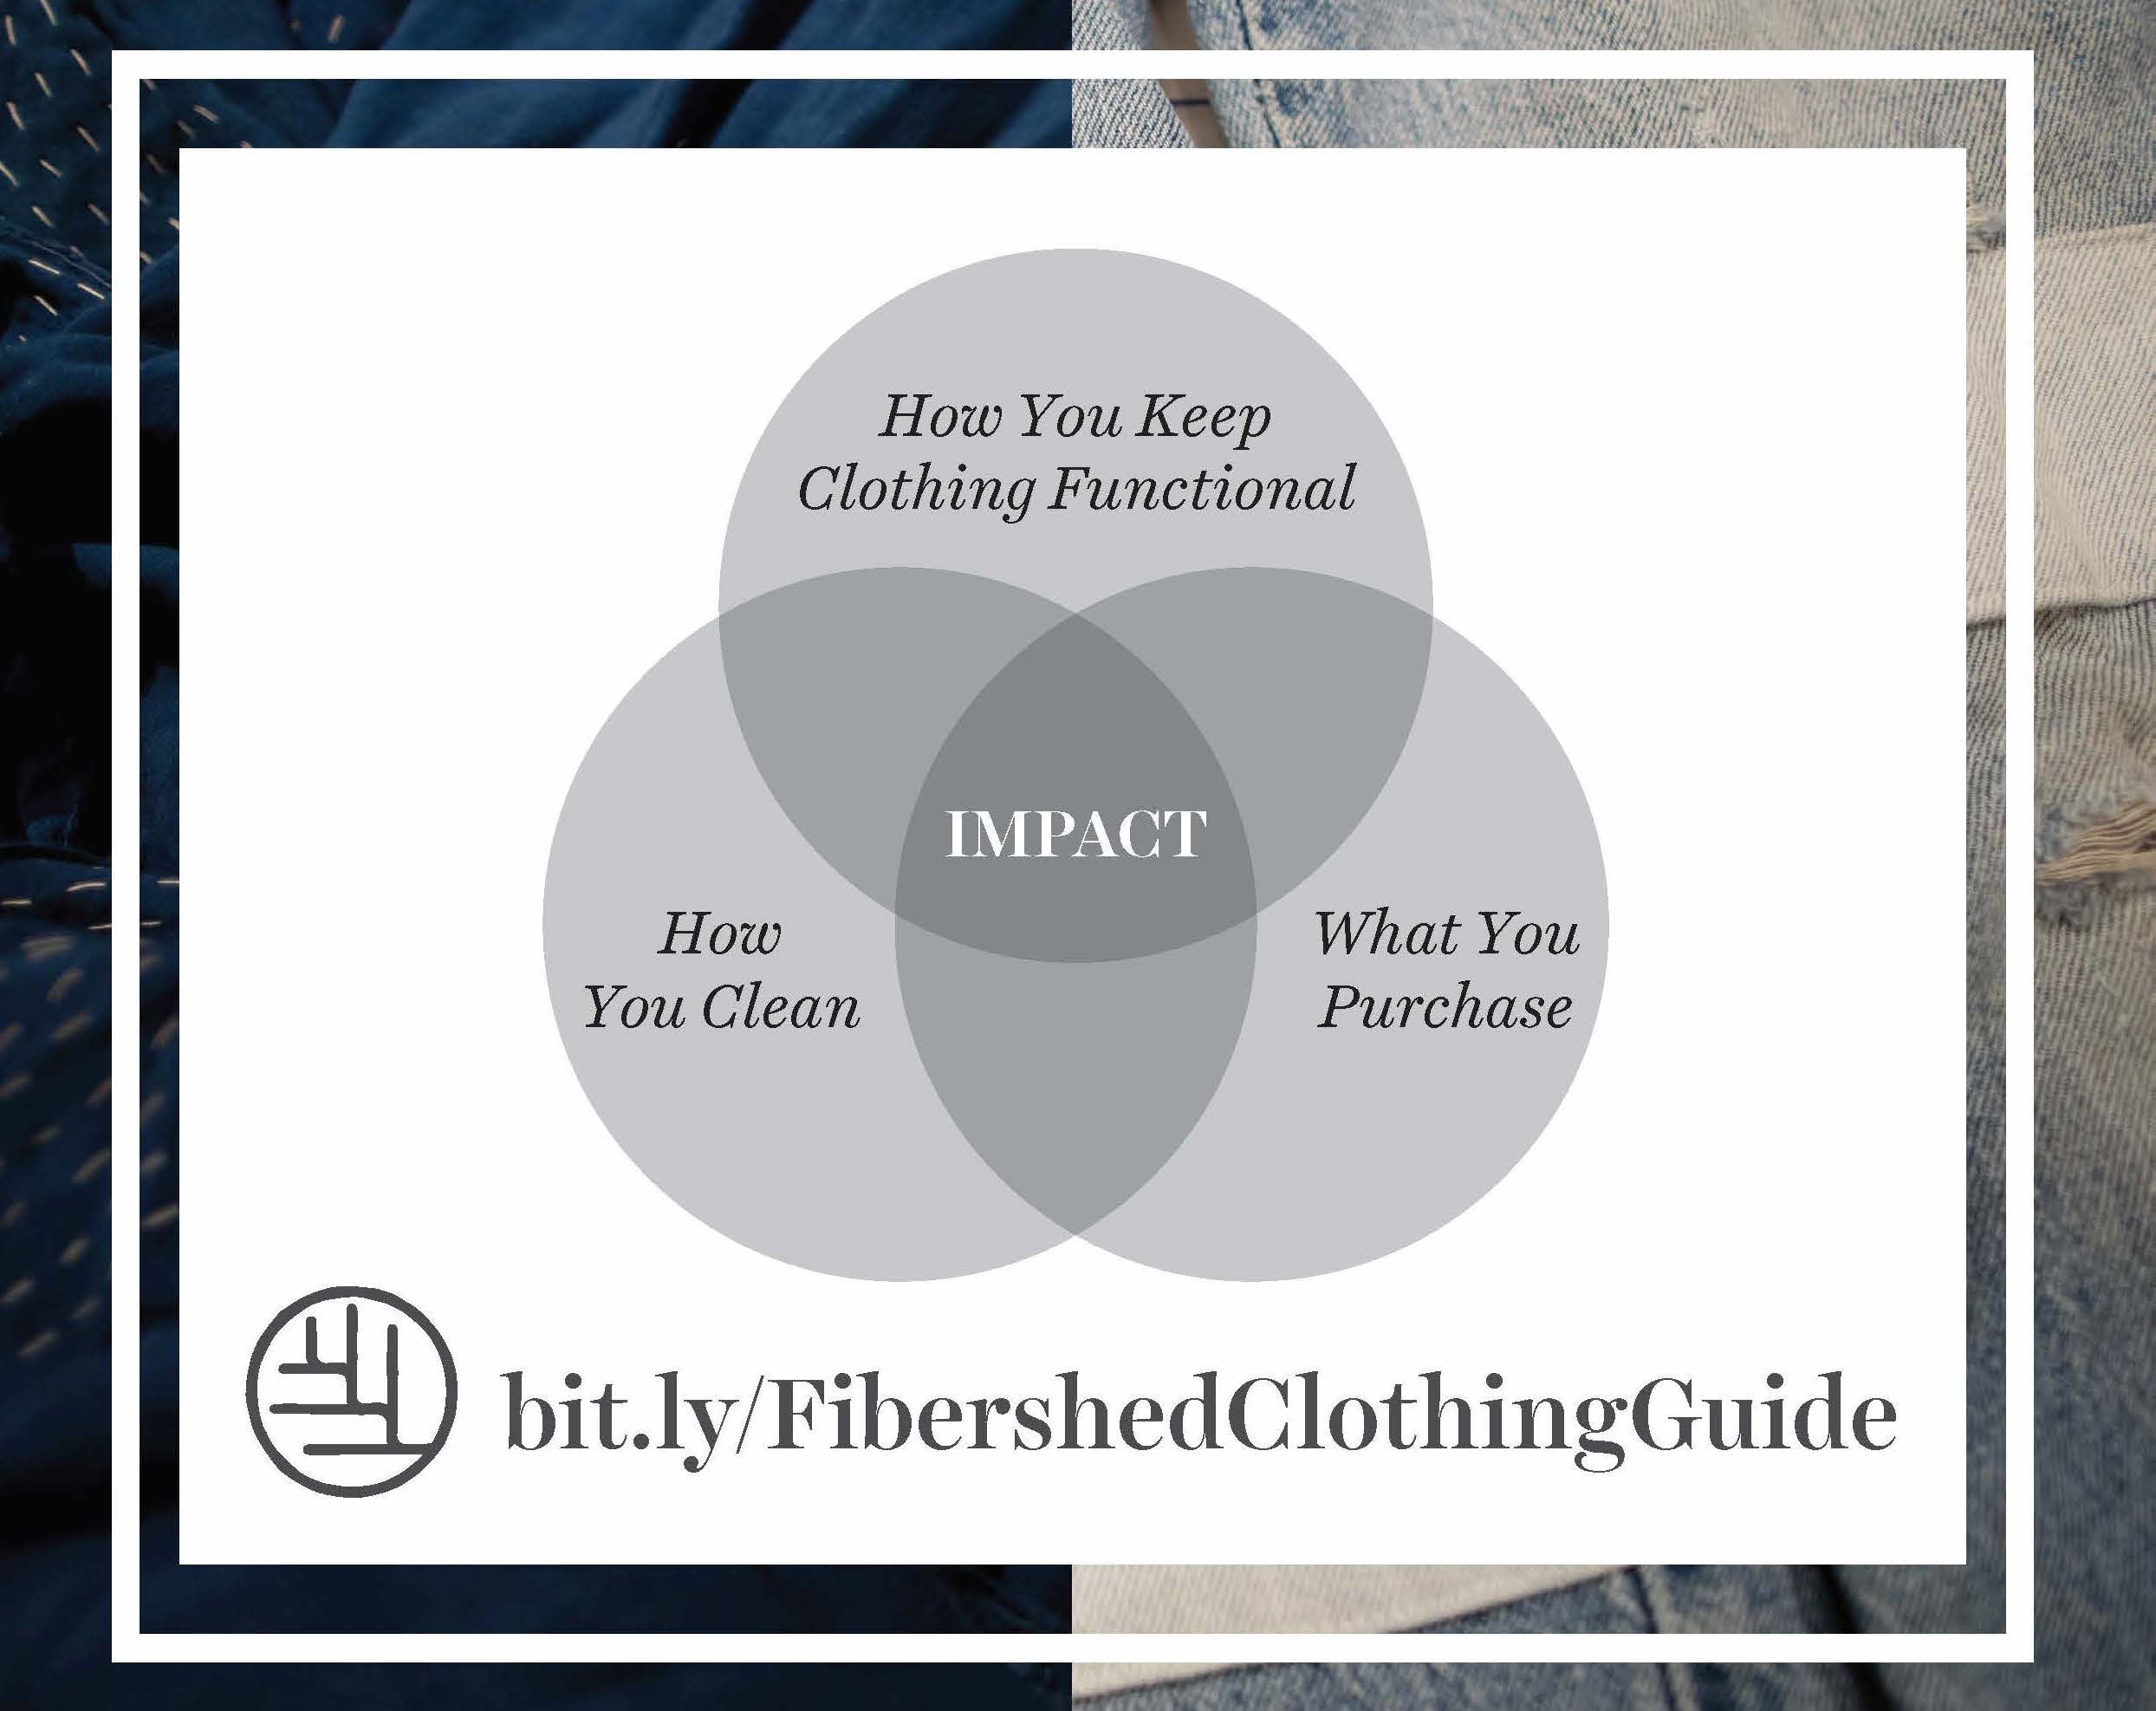 impact of clothing venn diagram with three circles: how you keep clothing functional, what you purchase, and how you care